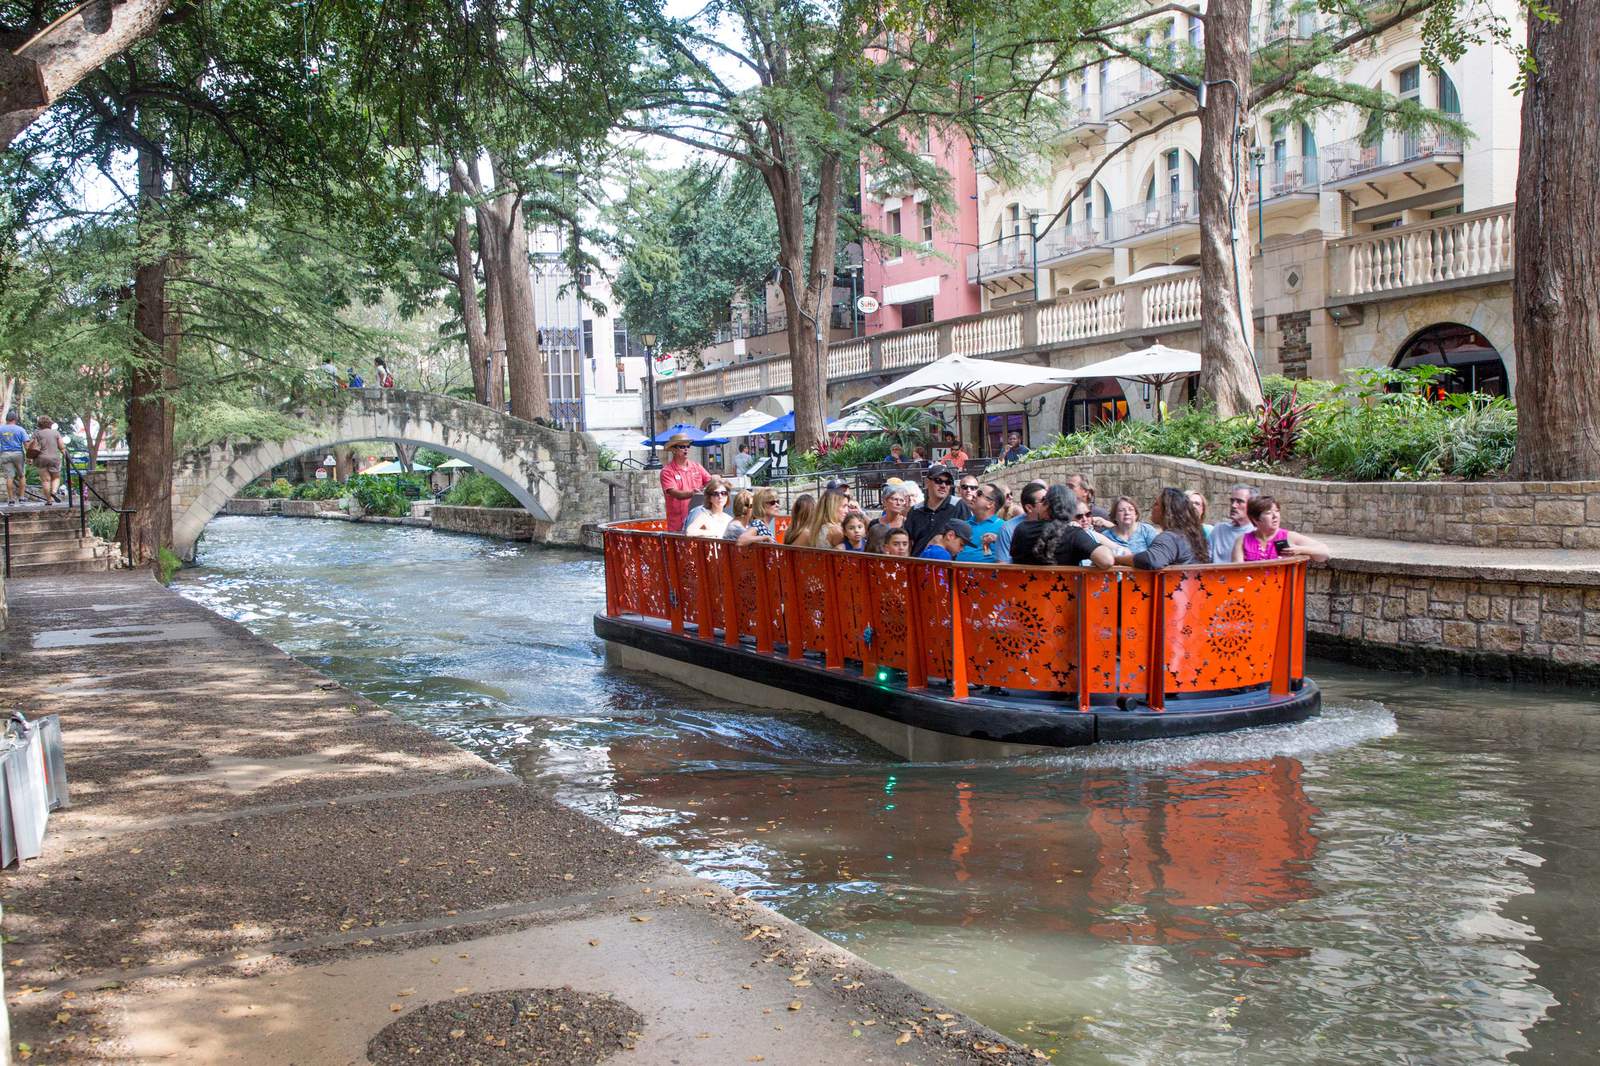 You can win prizes in San Antonio’s free scavenger hunt